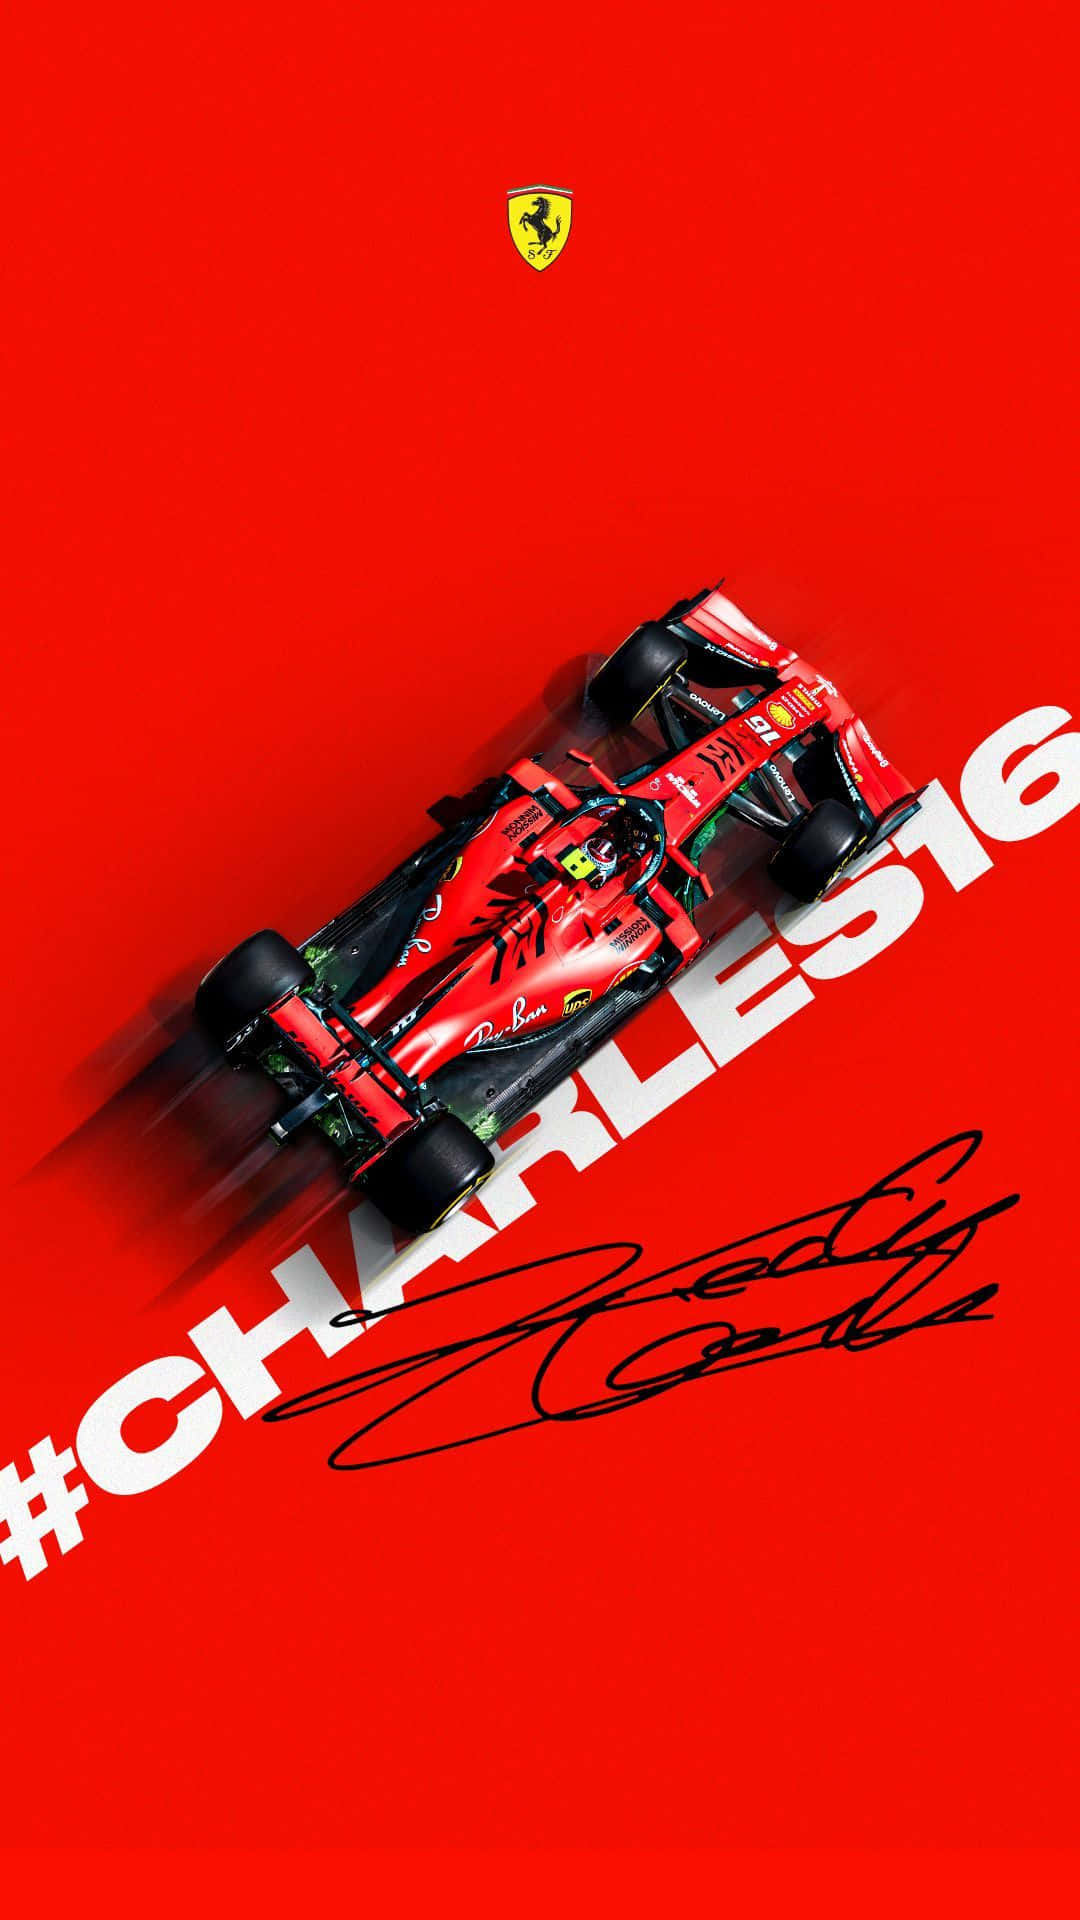 Get behind the wheel with Ferrari and the iPhone X Wallpaper